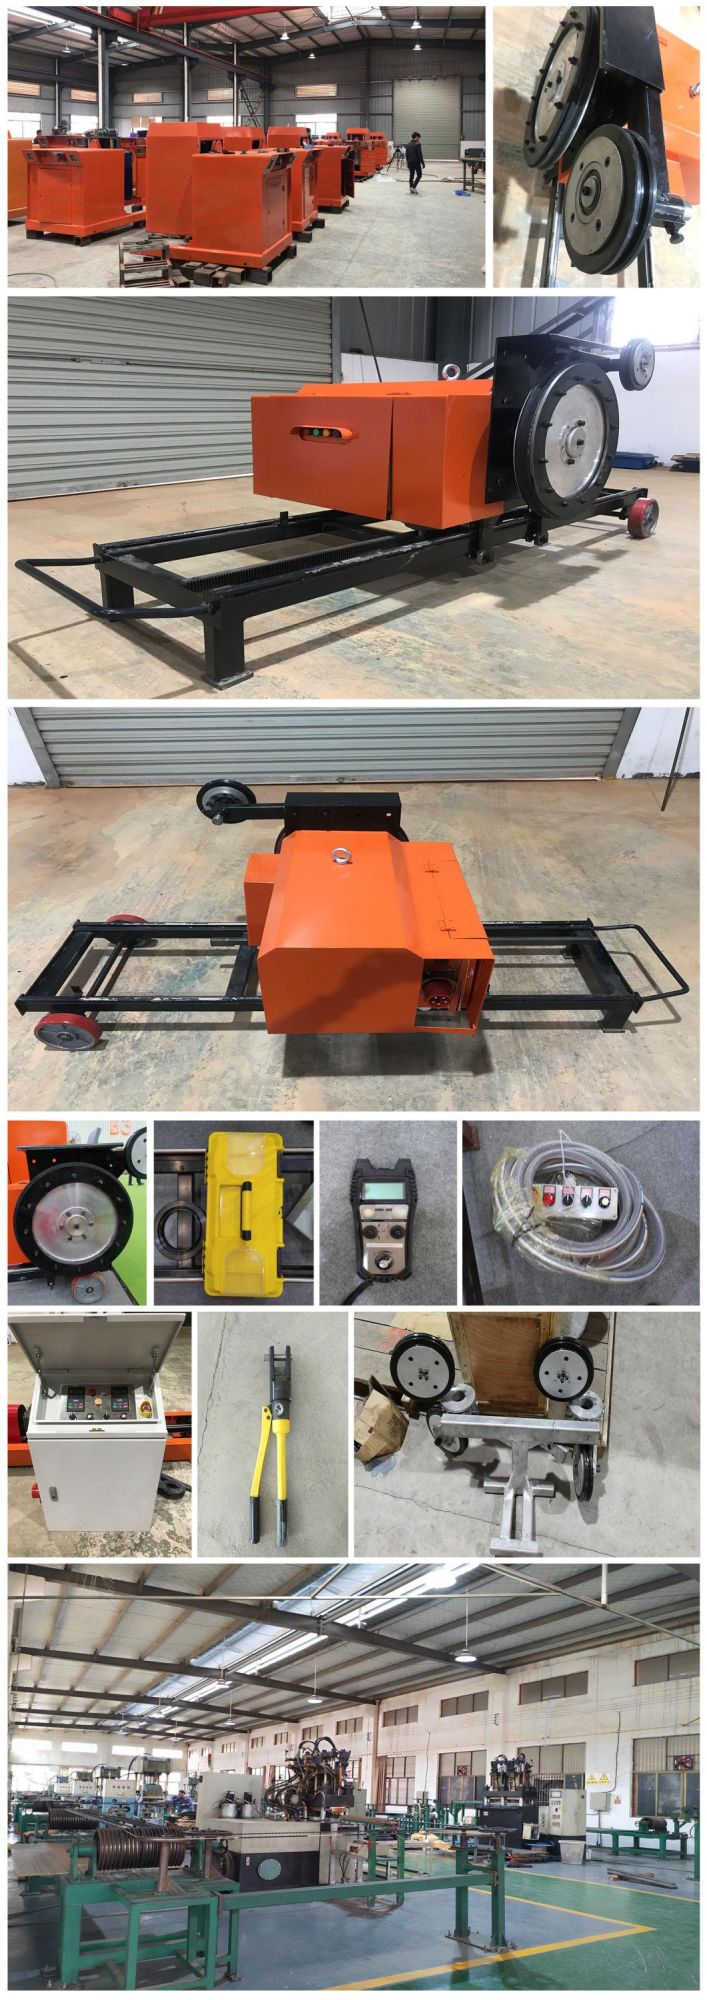 Small Size Wire Saw Machine with 18.5 Kw Power for Reinforced Concrete Bridge Demolition